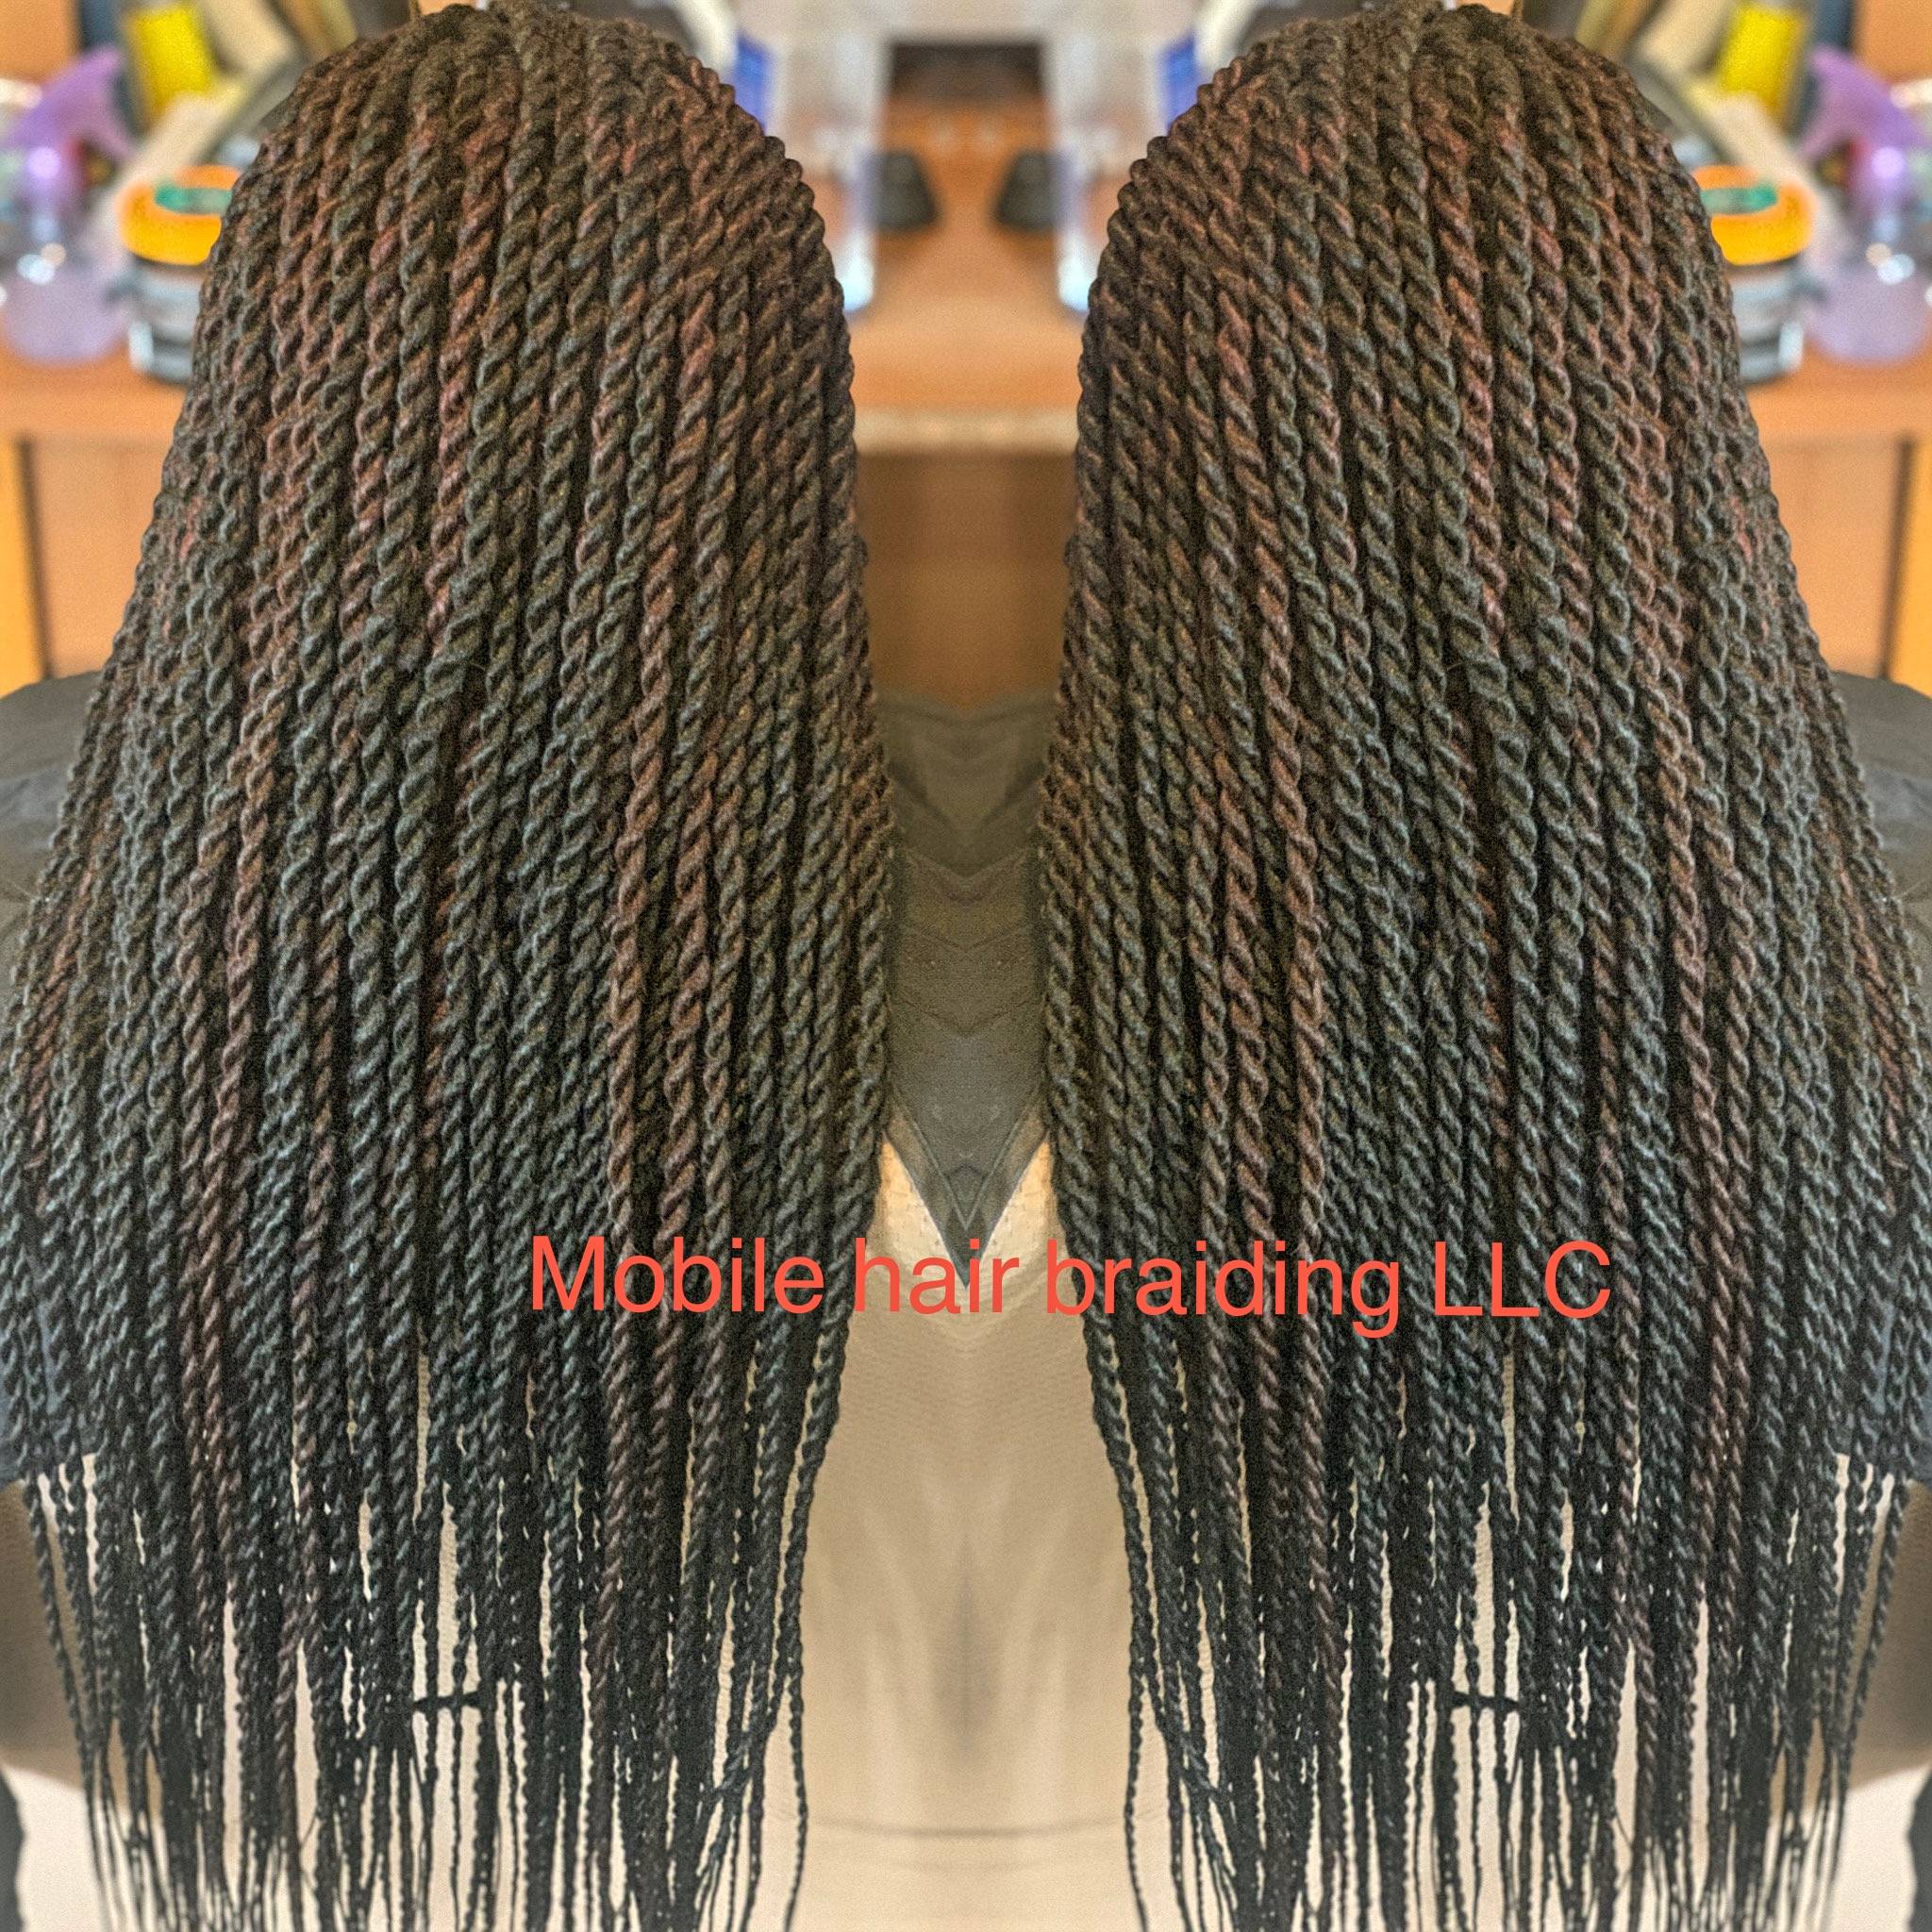 Senegalese Twist completed in Fort Washington, MD